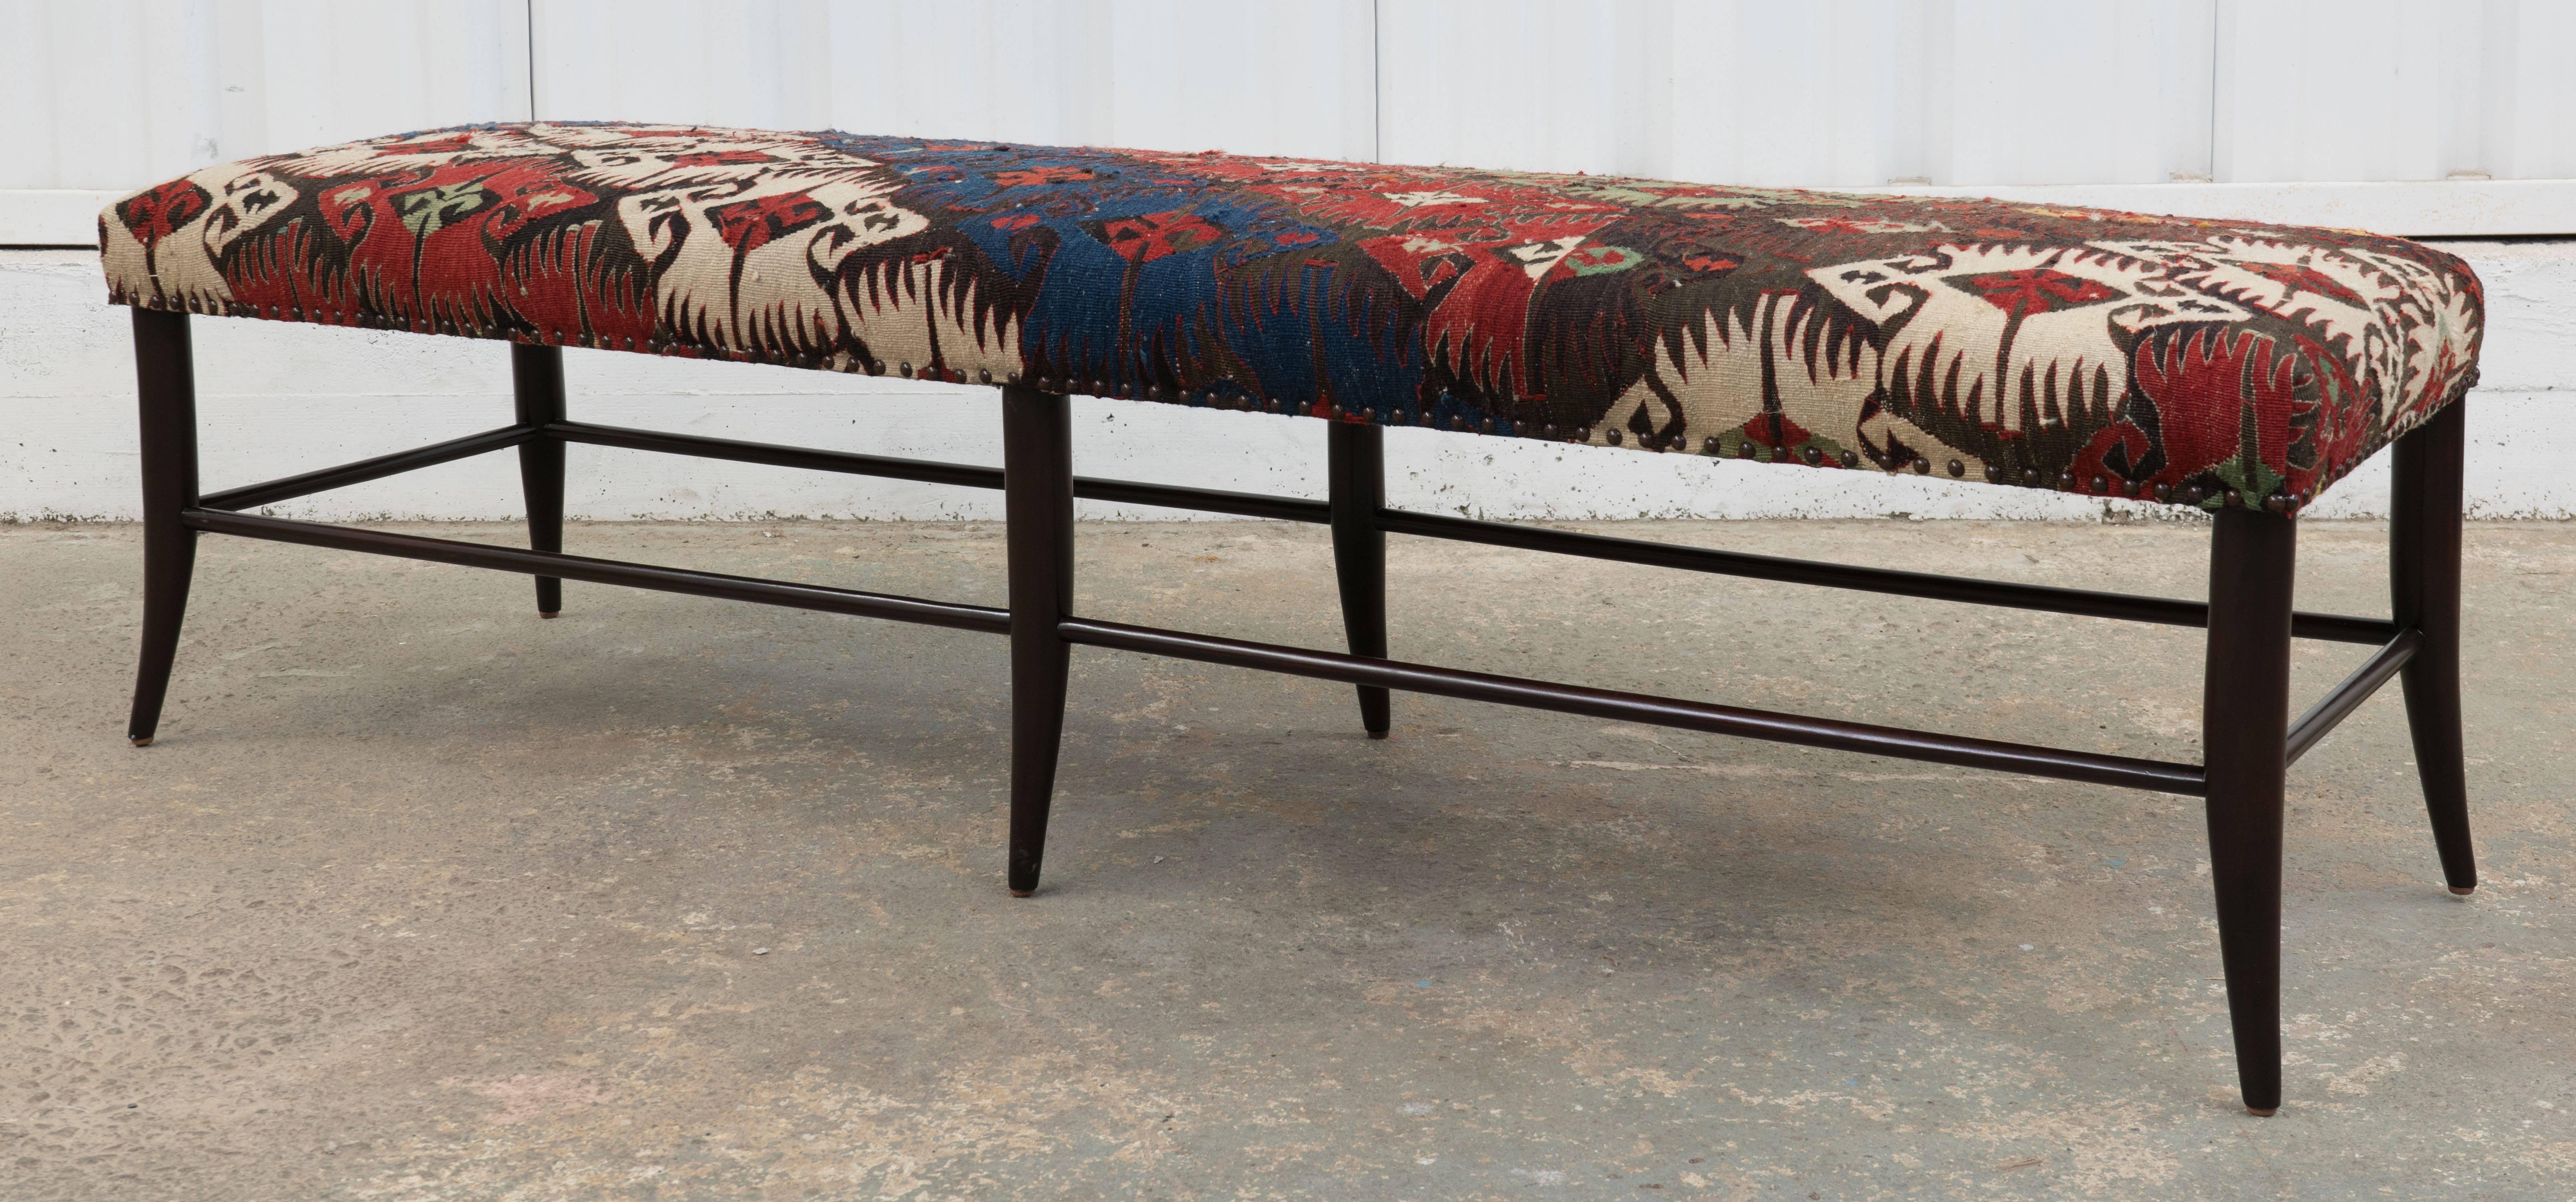 Hollywood at Home's Croft bench the base is handmade in Los Angeles and upholstered in a vintage Kilim rug/textile.